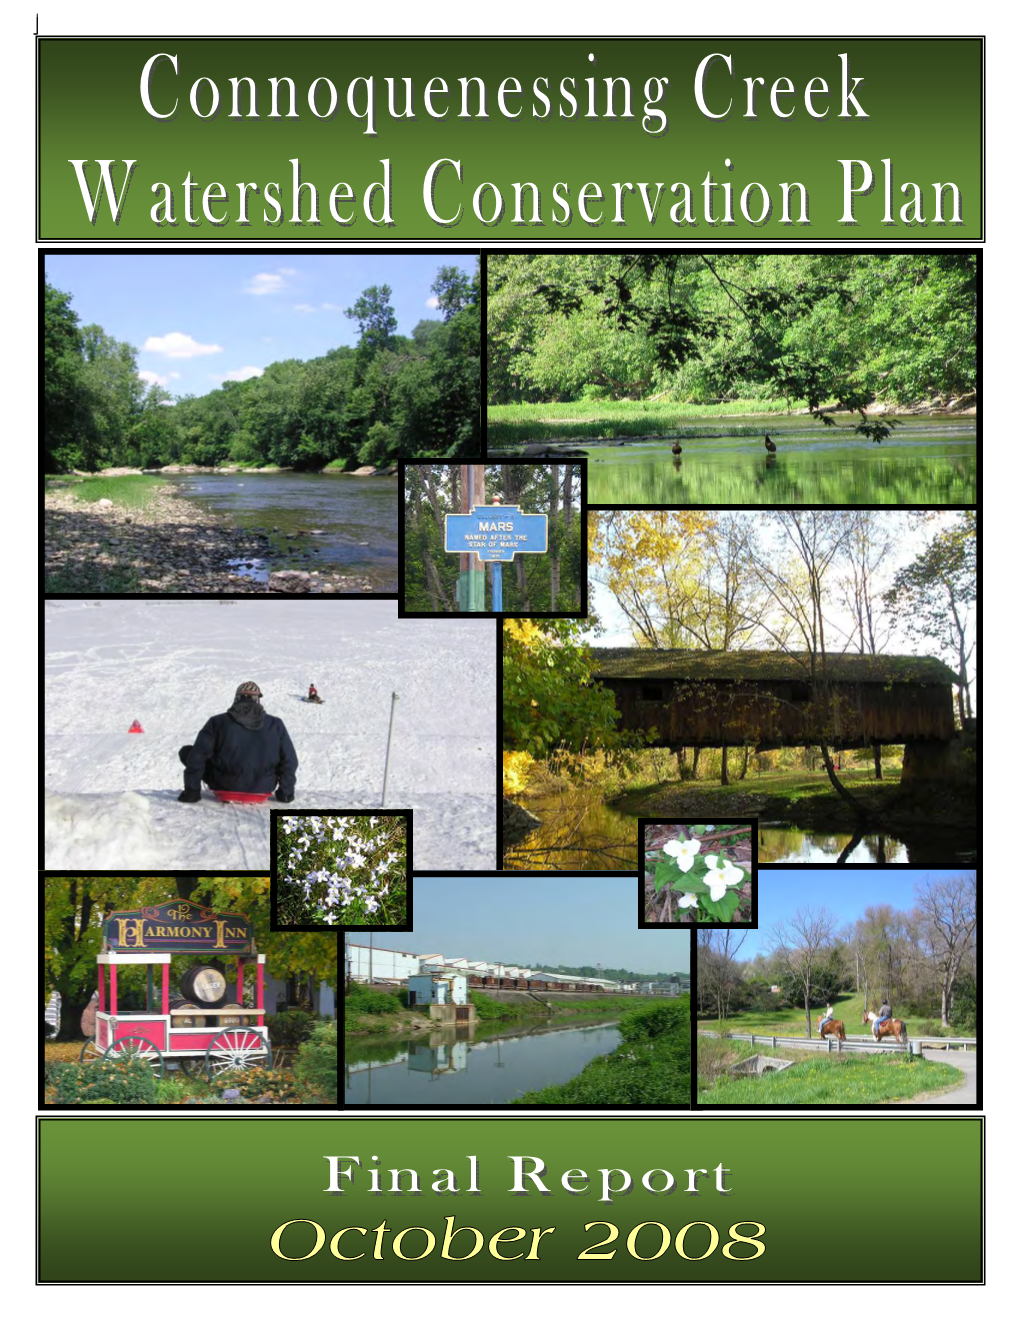 View the Connoquenessing Creek Watershed Conservation Plan